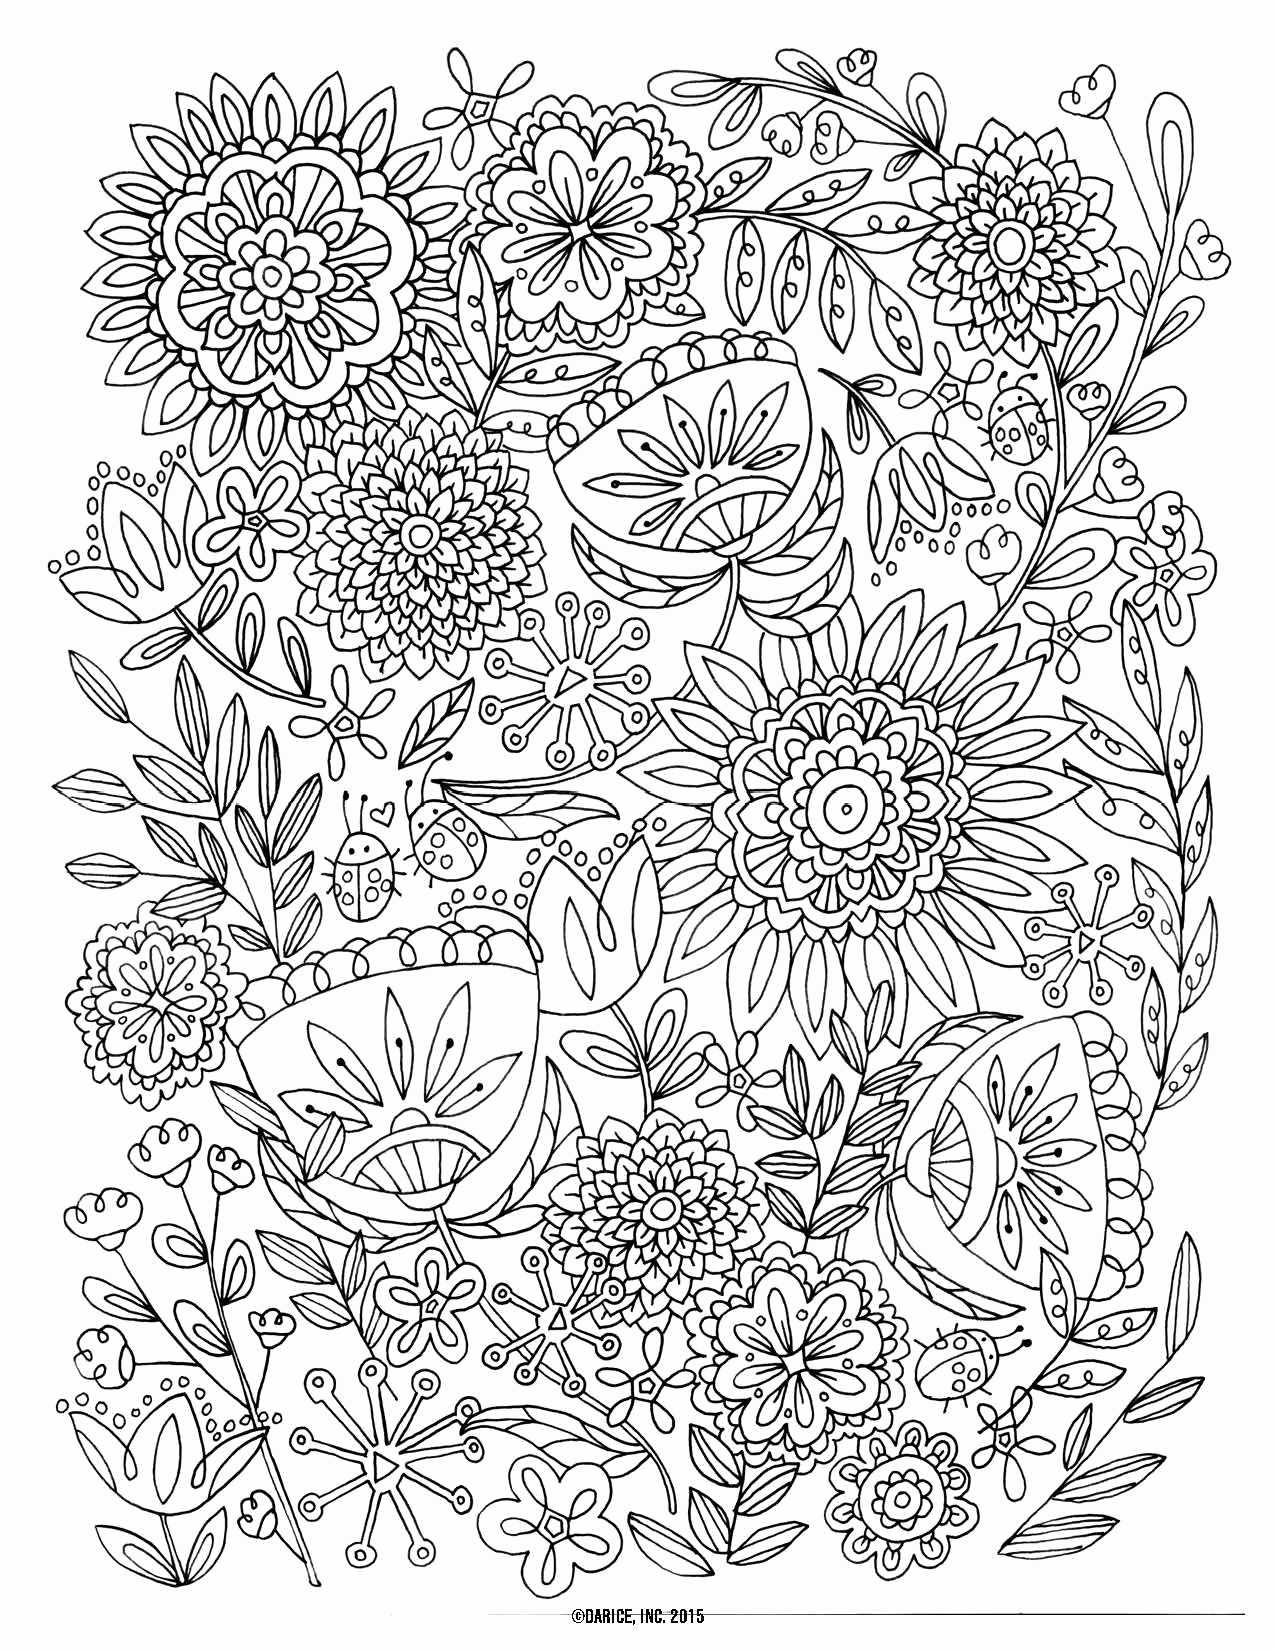 Coloring Worksheets for Preschool or Printable Od Dog Coloring Pages Free Colouring Pages – Fun Time